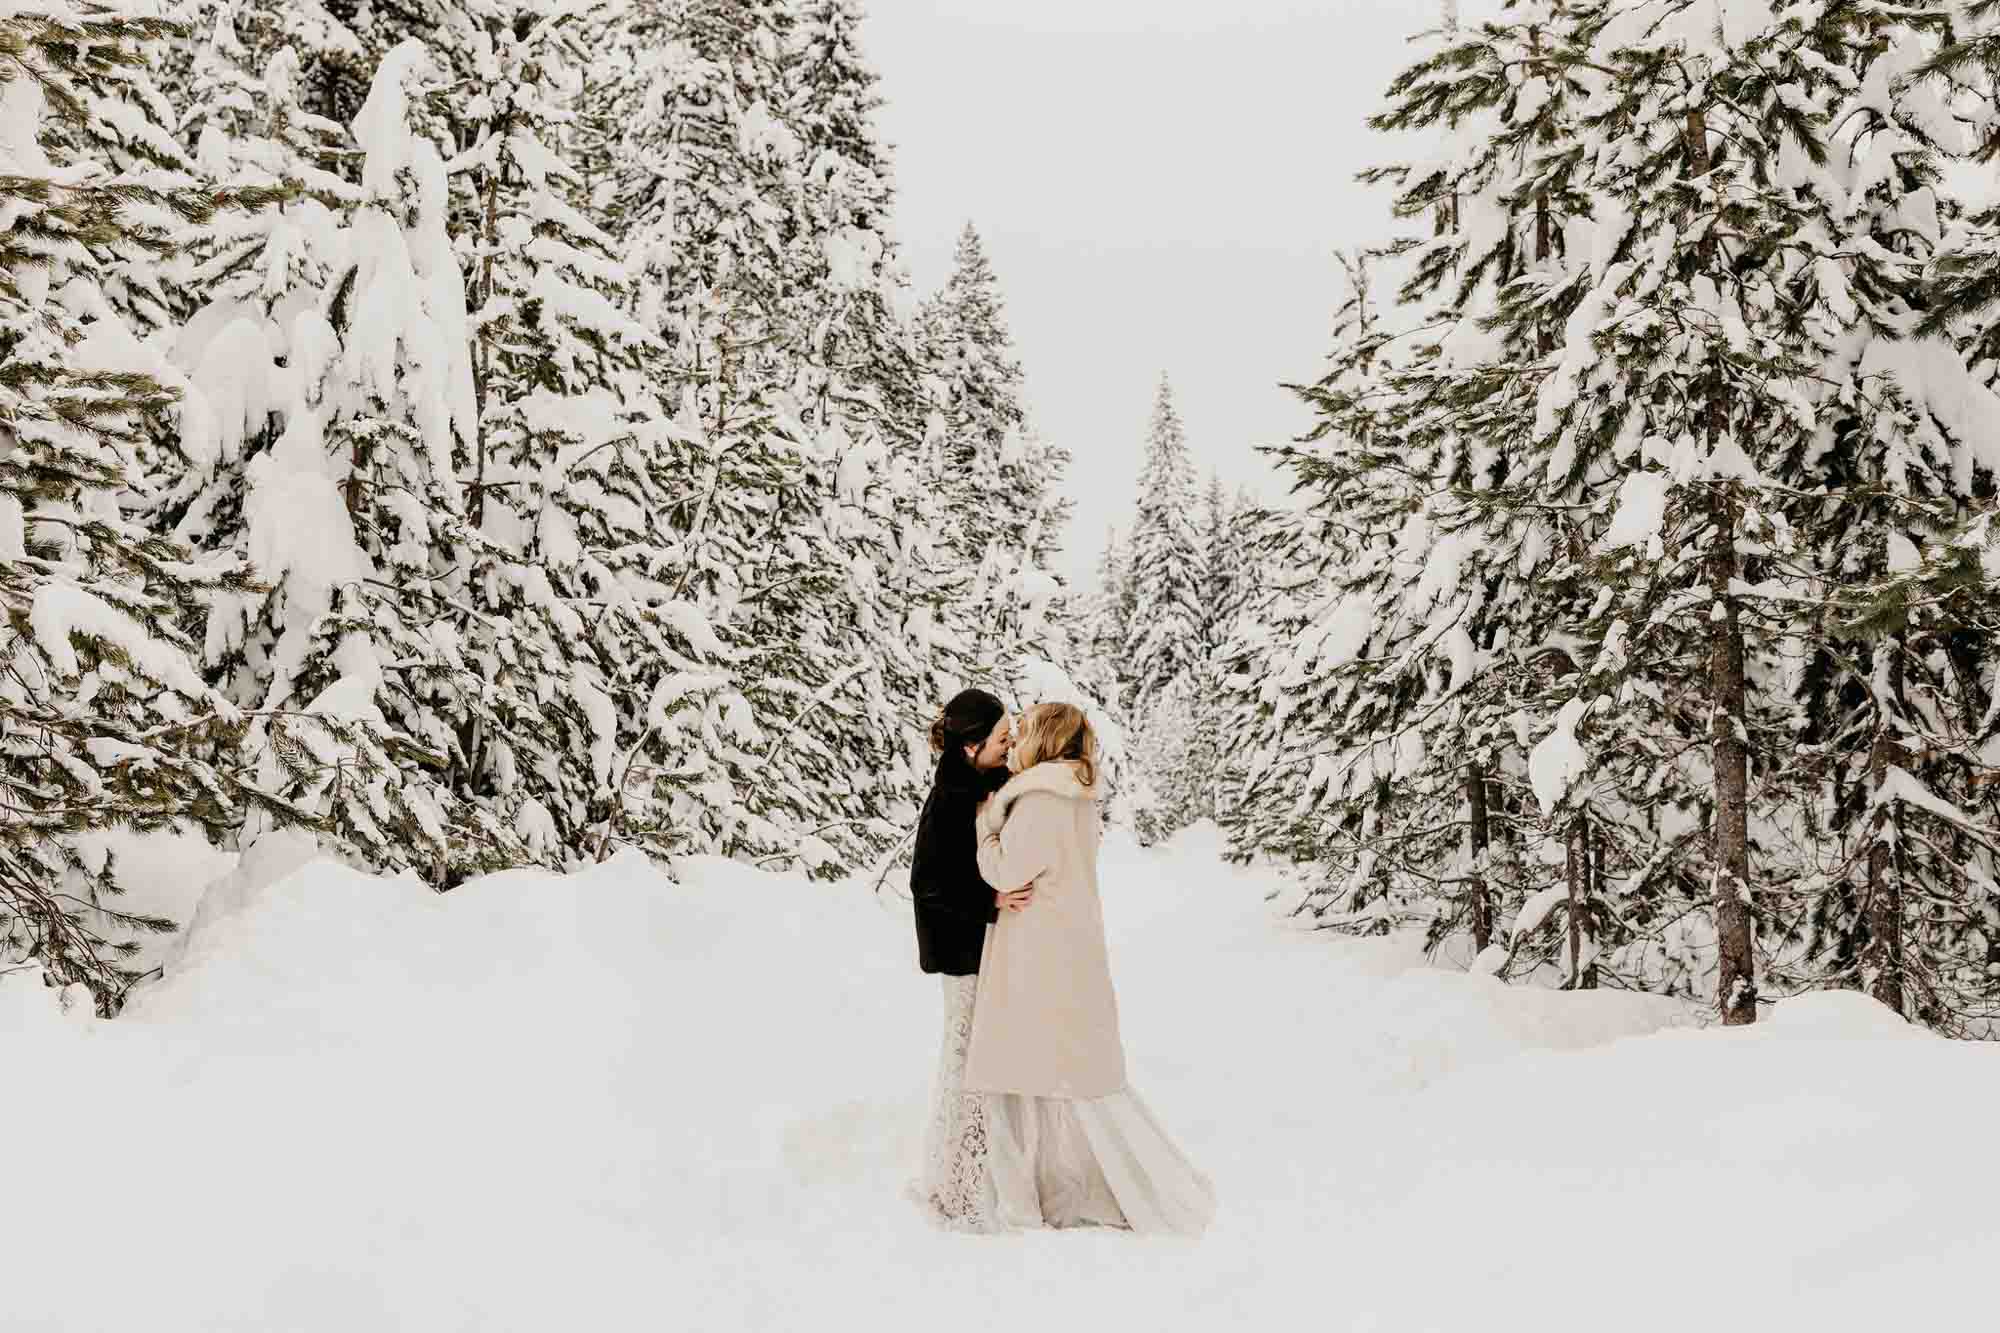 Outdoor winter wedding ideas with sustainable elements